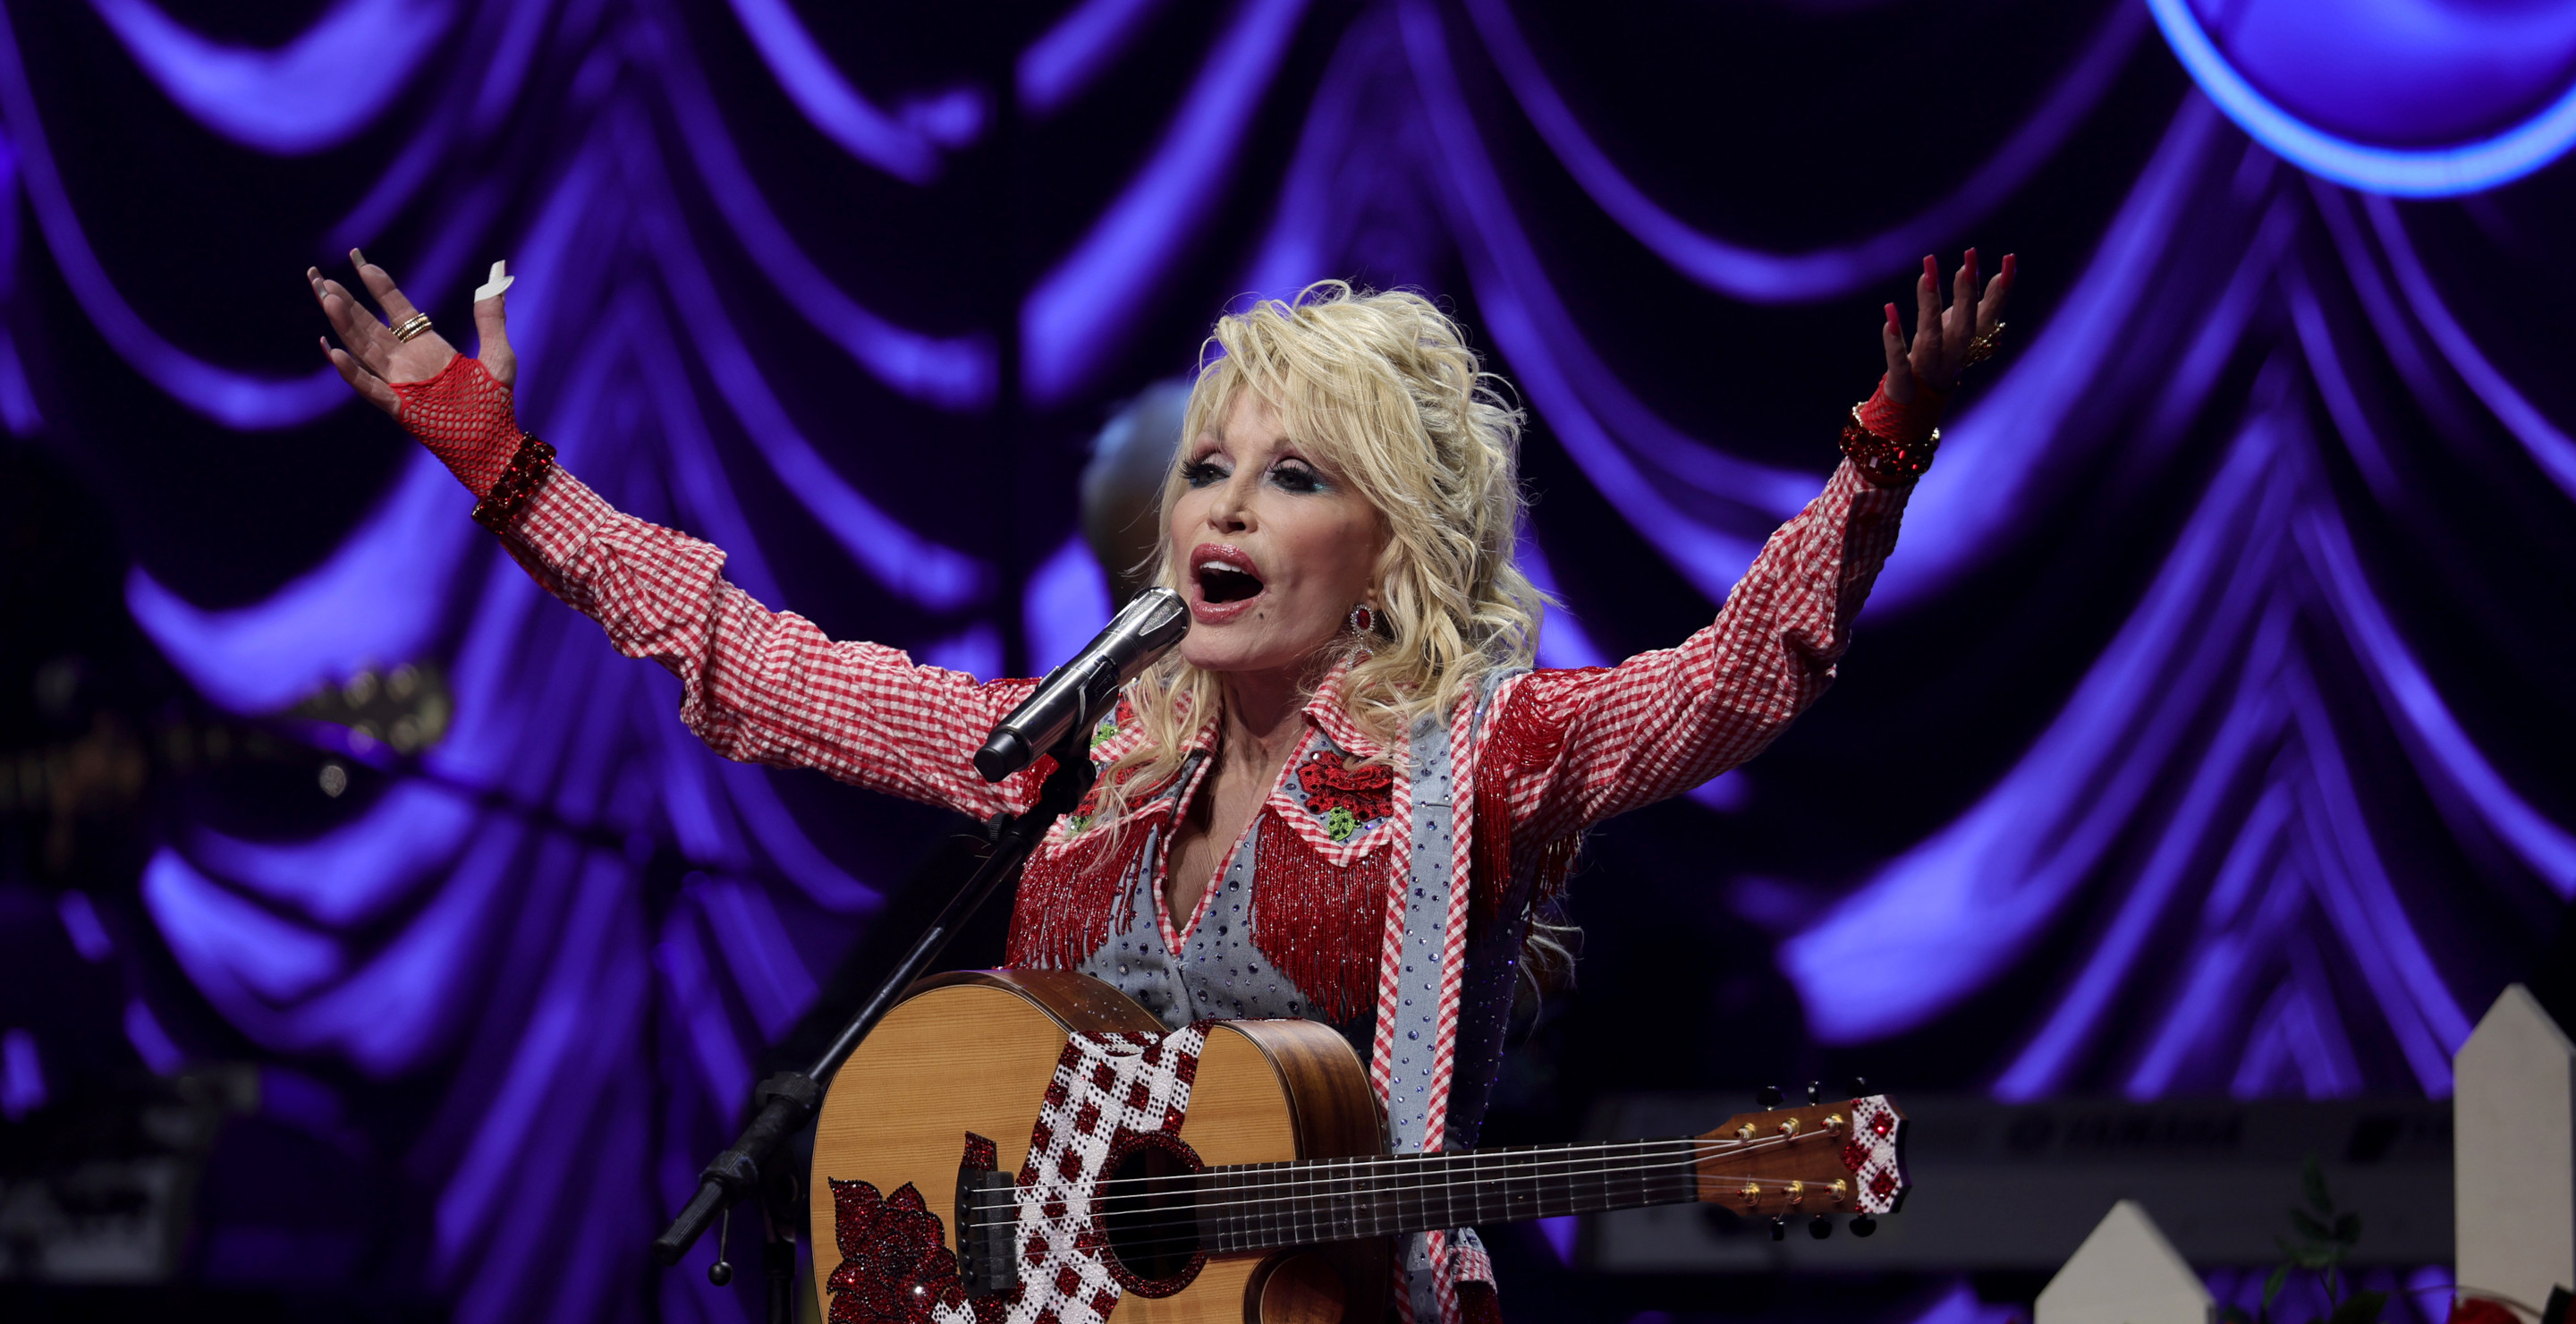 Dolly Parton Is Creating A Secret Album, And It's Massive, According to her Niece